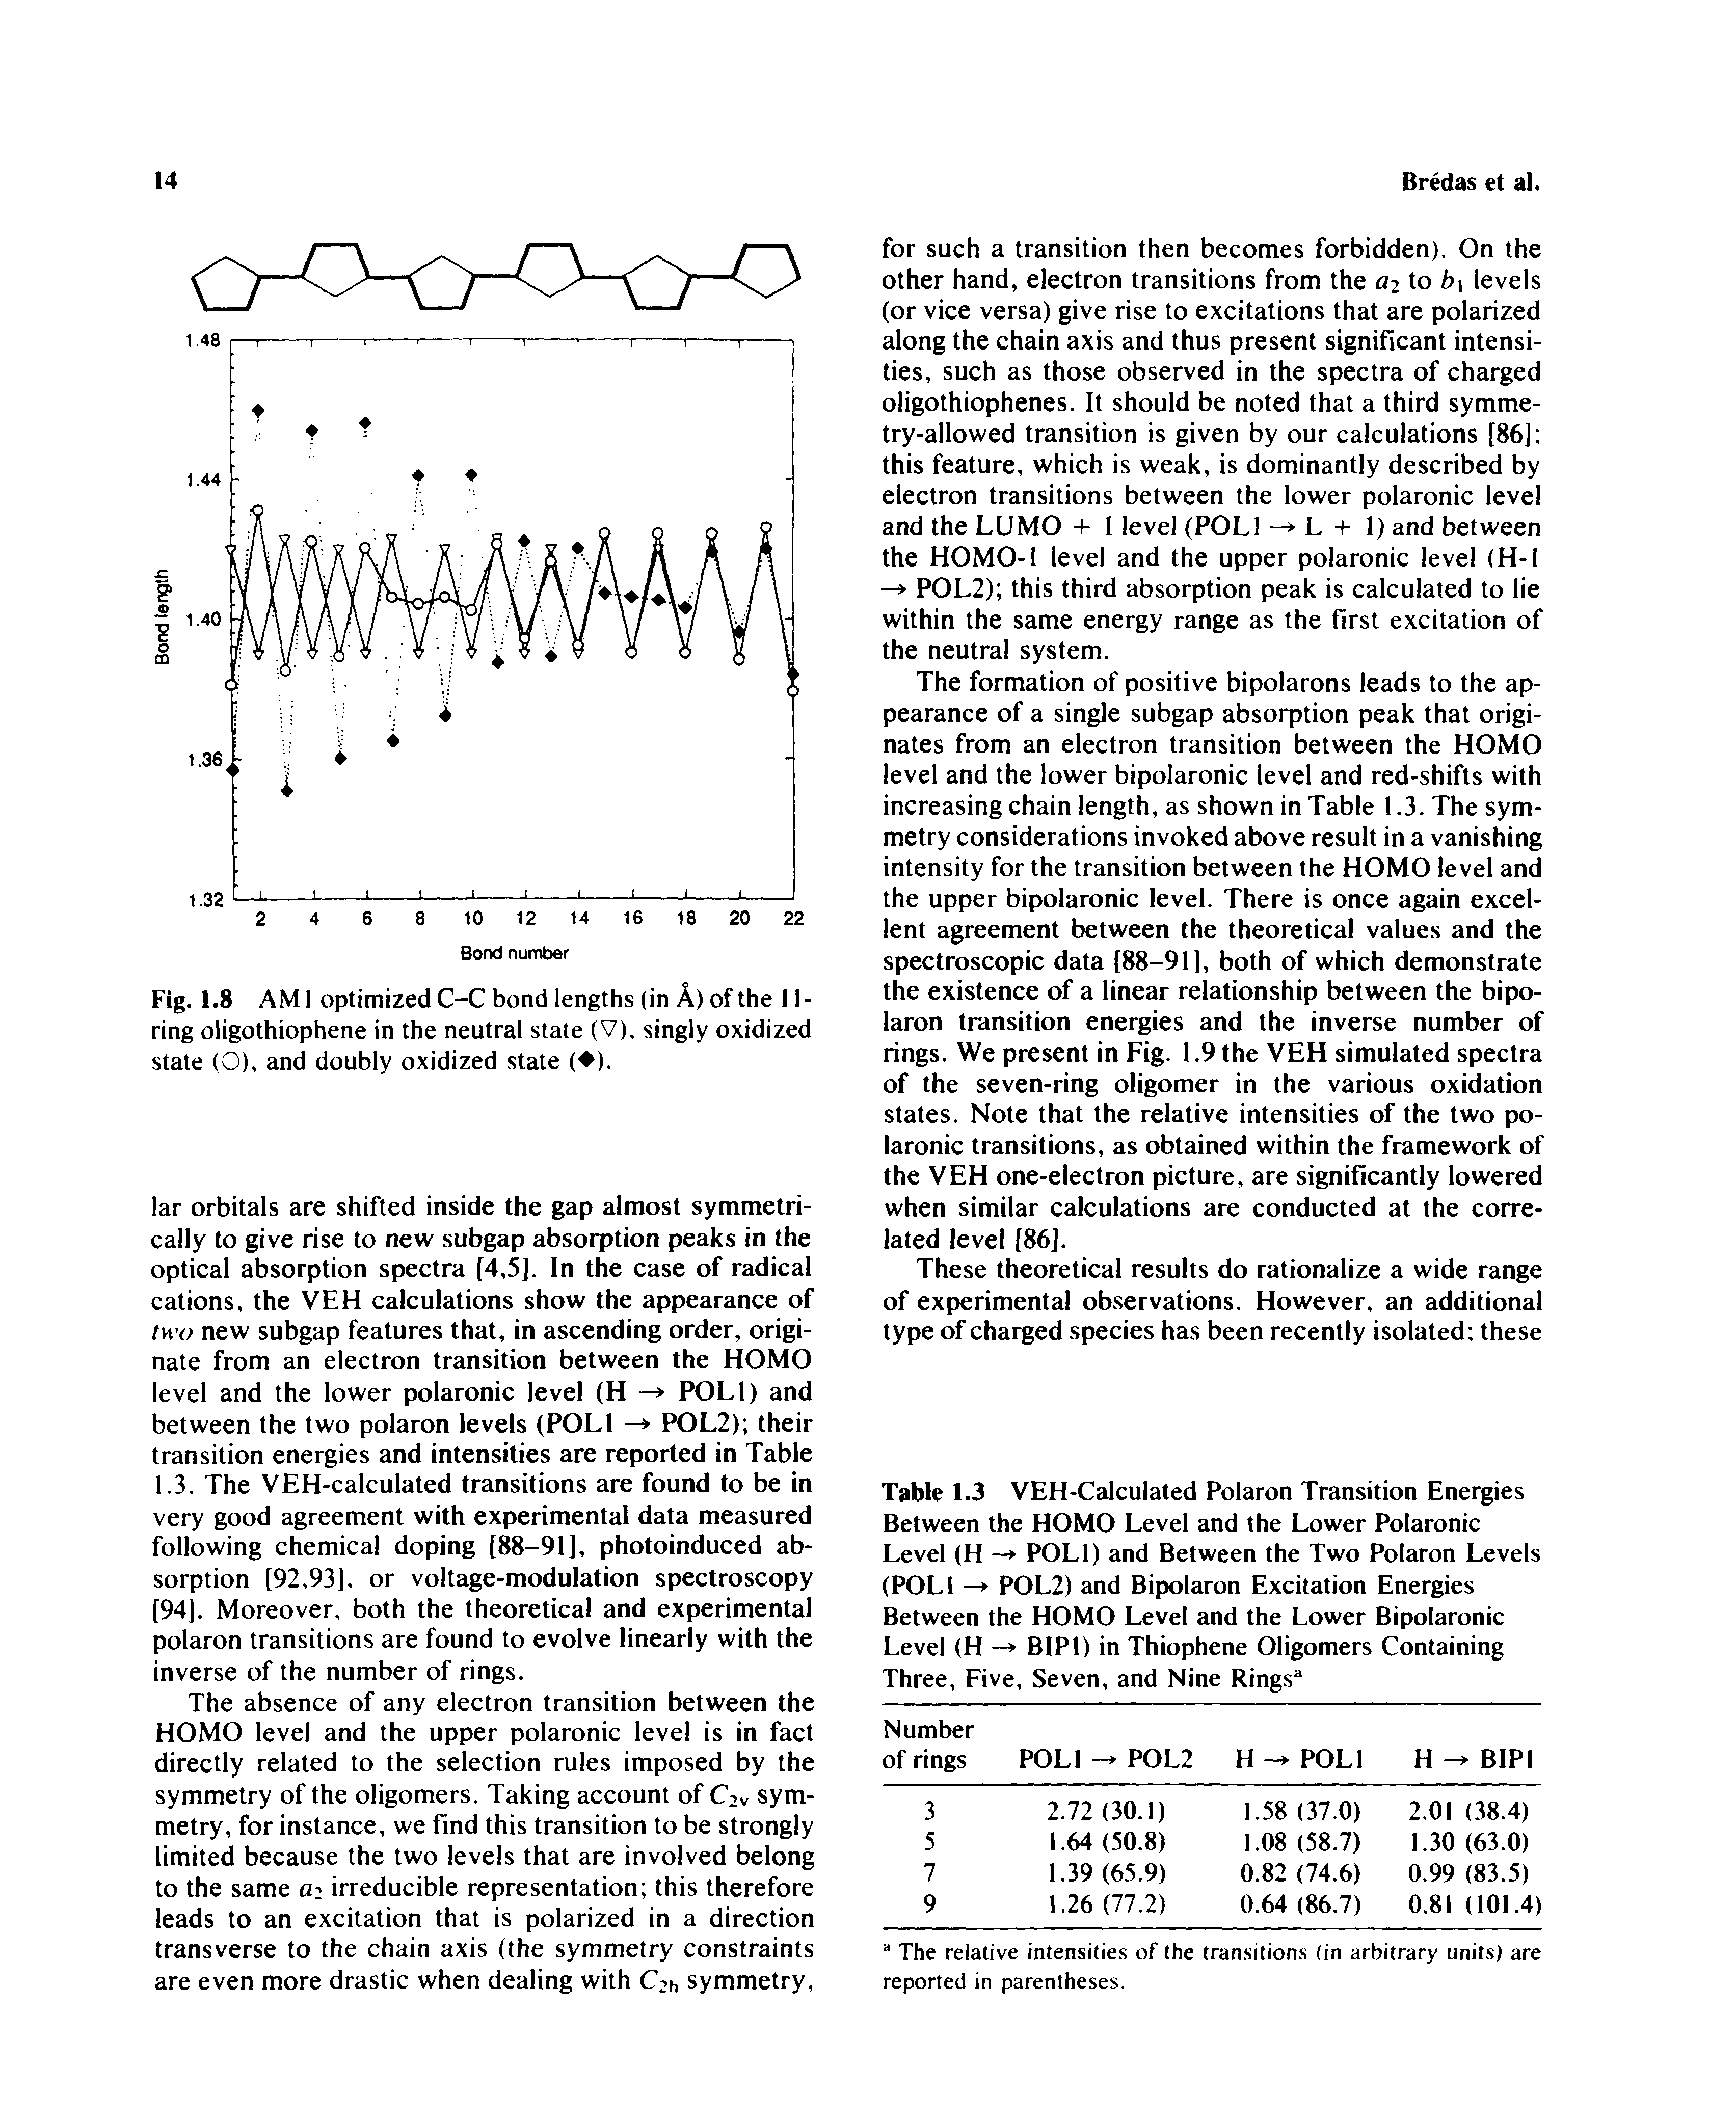 Table 1.3 VEH-Calculated Polaron Transition Energies Between the HOMO Level and the Lower Polaronic Level (H — POLl) and Between the Two Polaron Levels (POLl - P0L2) and Bipolaron Excitation Energies Between the HOMO Level and the Lower Bipolaronic Level (H -> BlPl) in Thiophene Oligomers Containing Three, Five, Seven, and Nine Rings ...